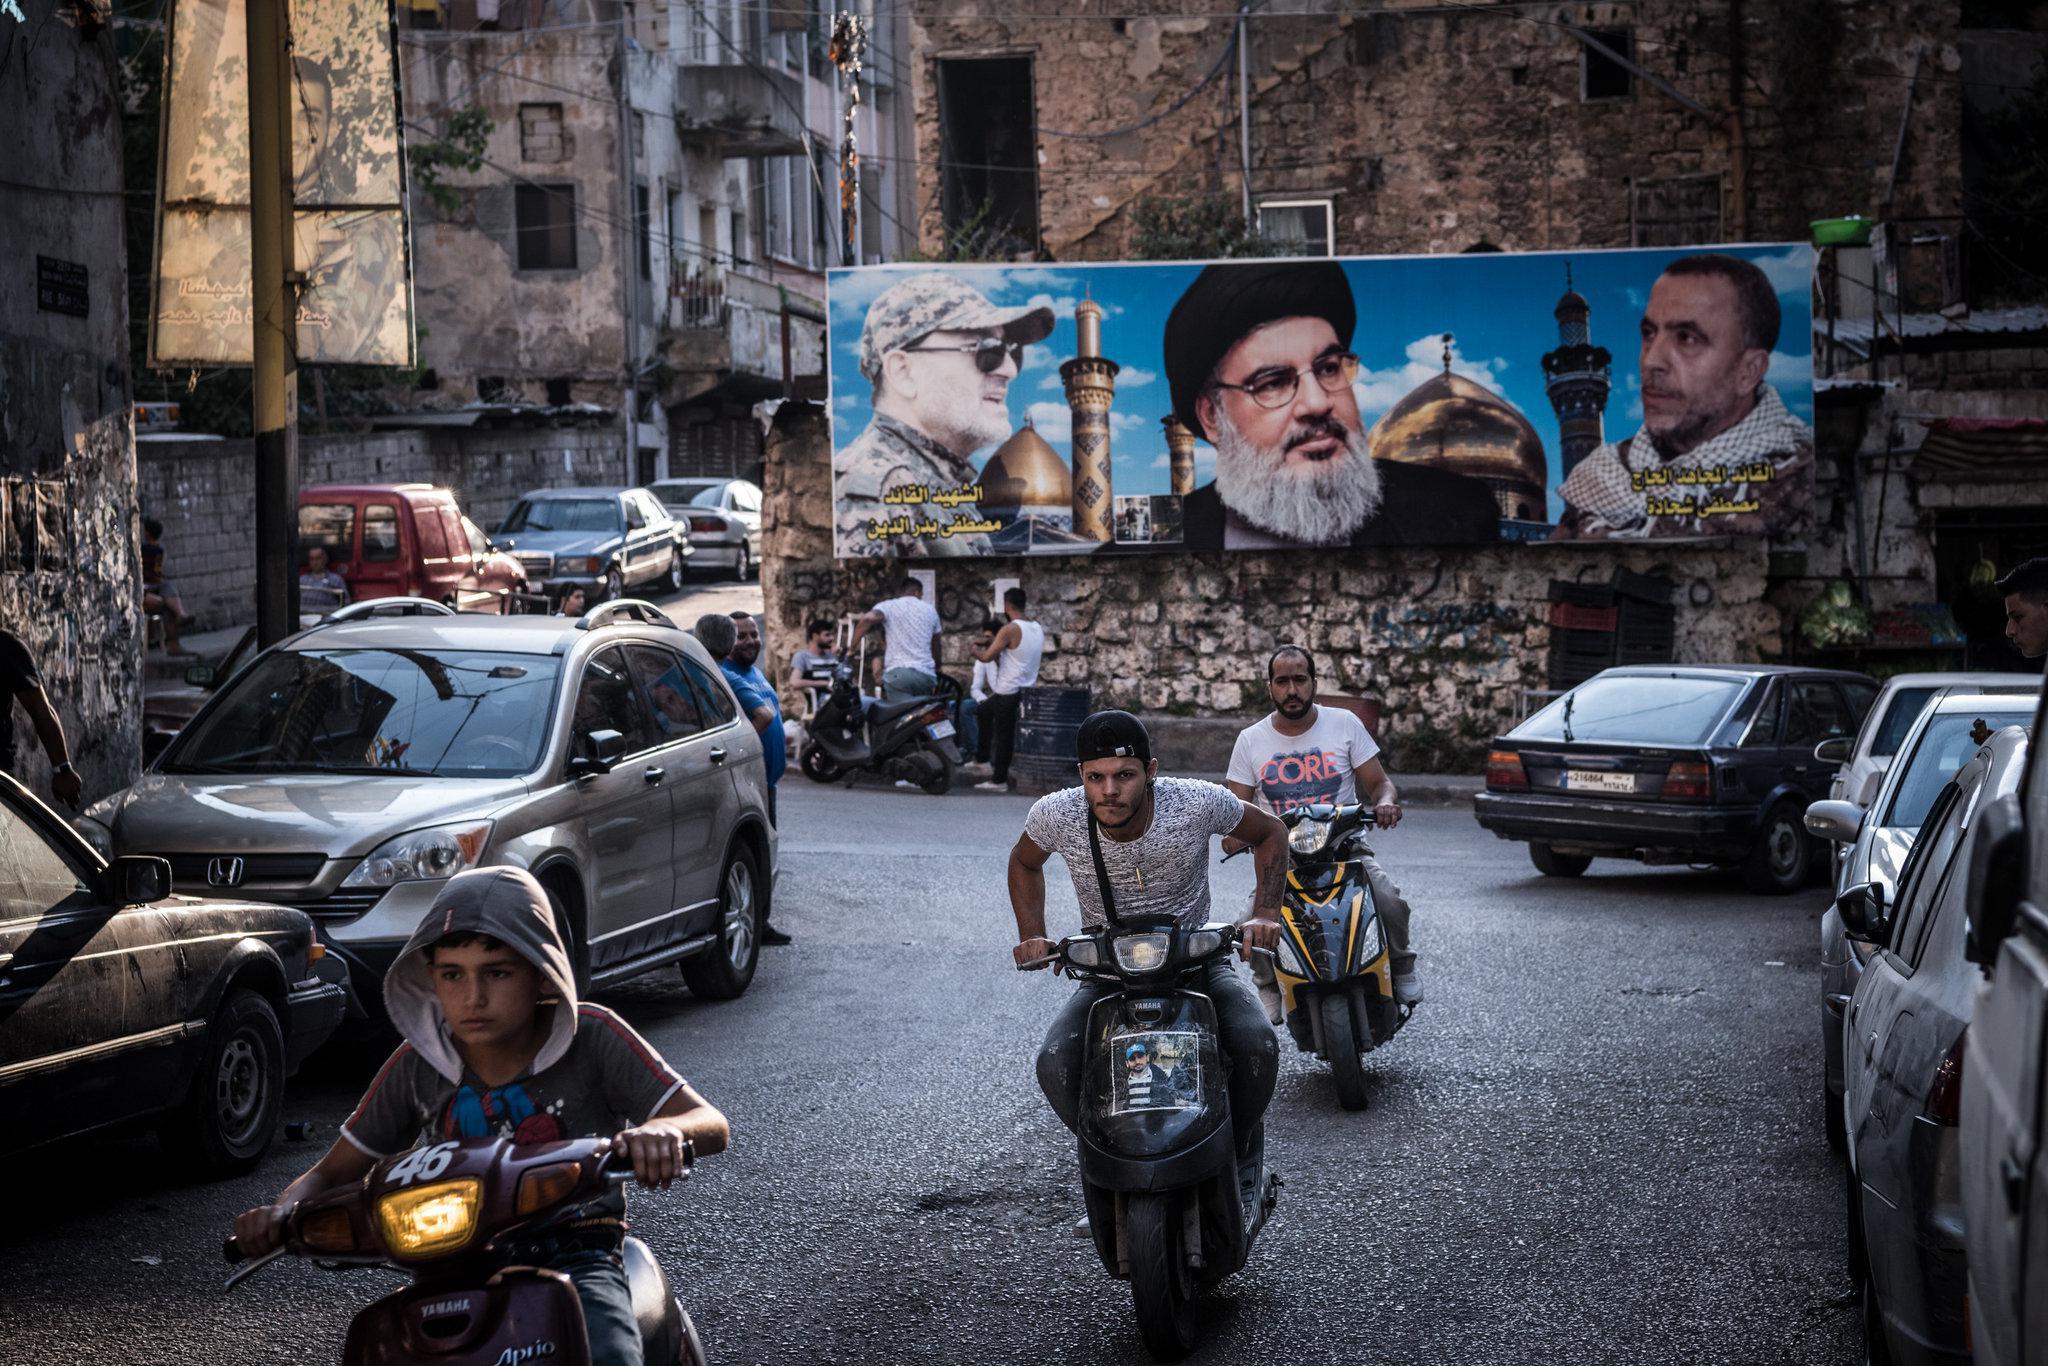 ifmat - Iran out to remake mideast with Arab enforcer - Hezbollah